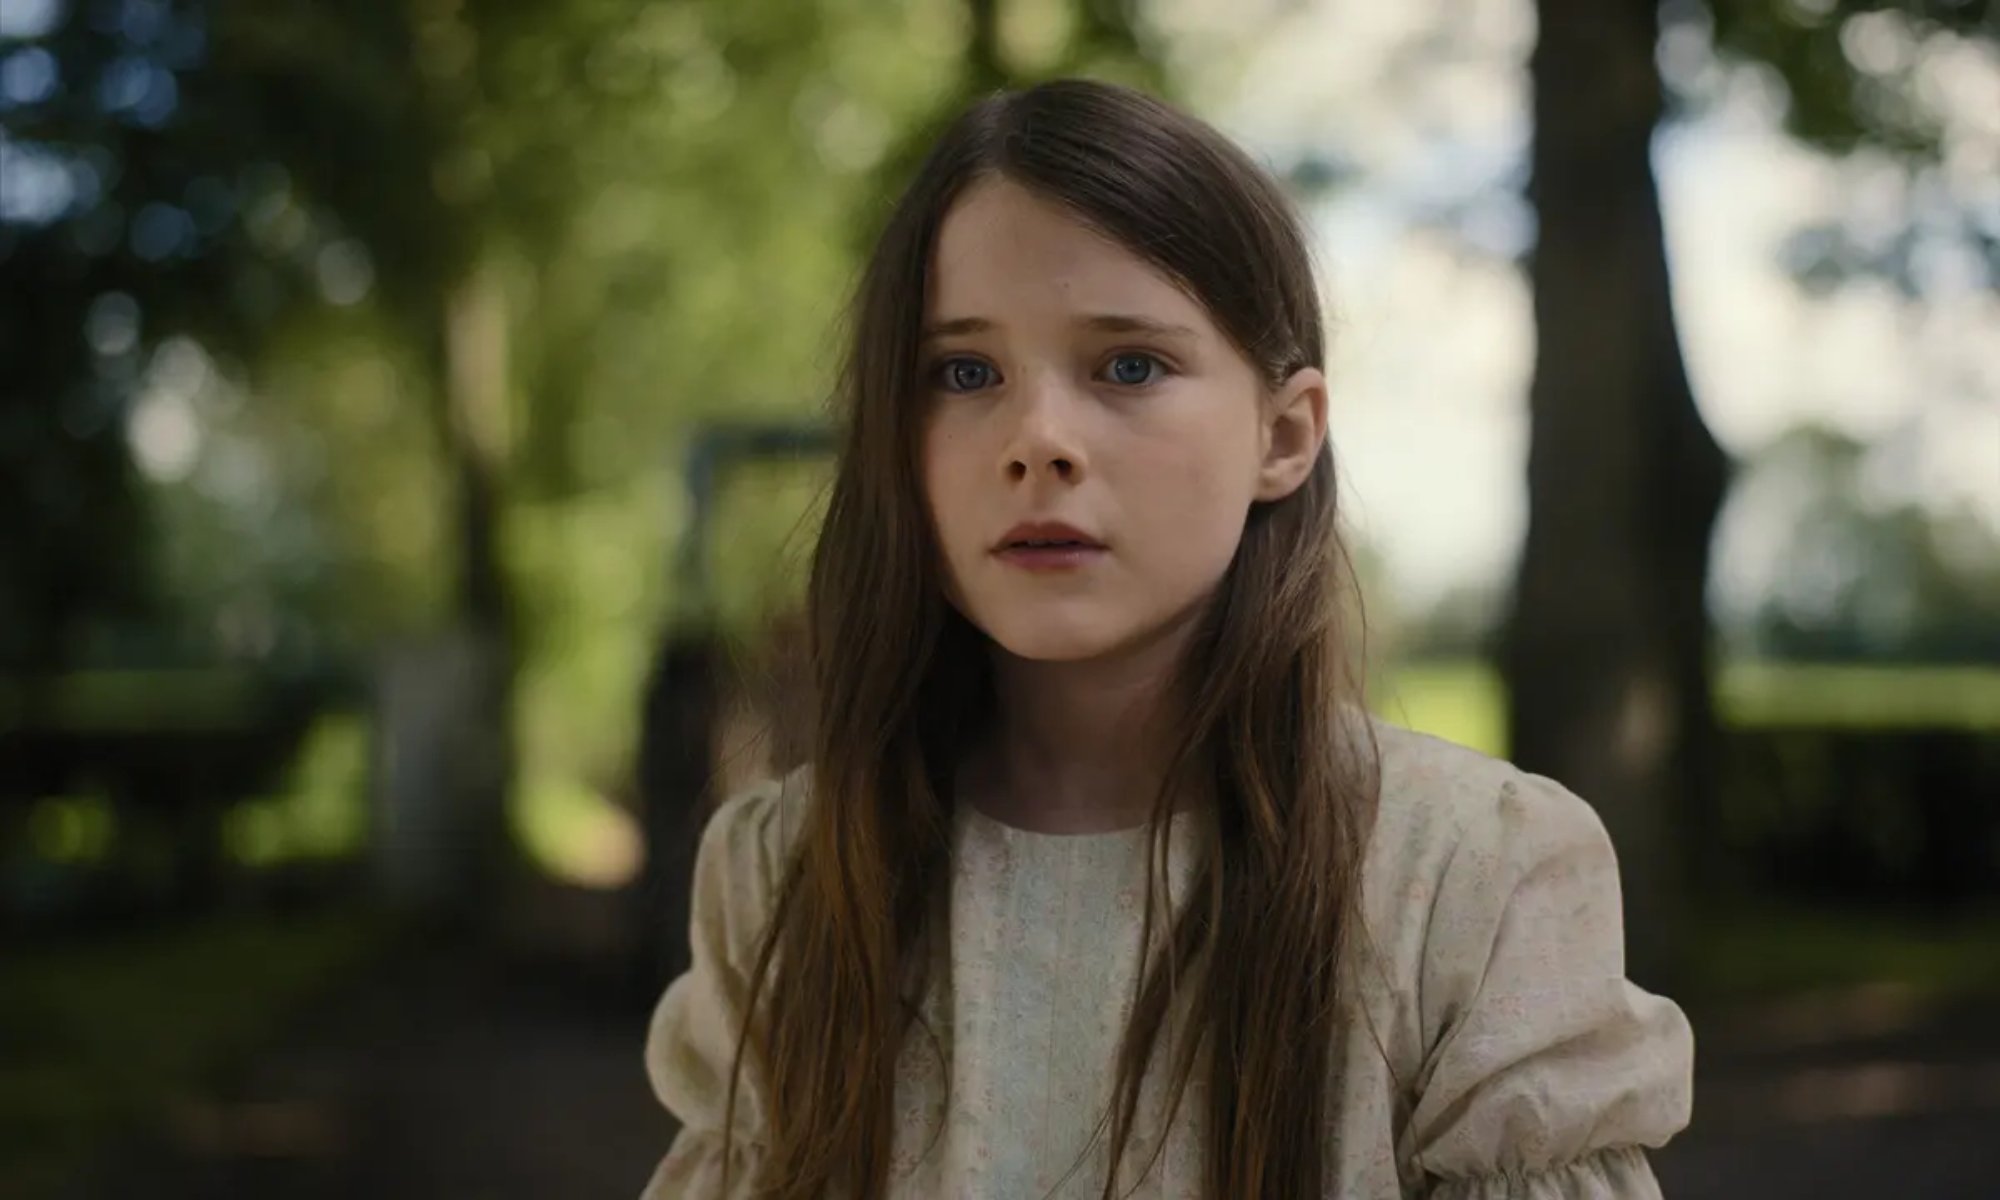 'The Quiet Girl' Catherine Clinch as Cáit wearing a white dress looking worried with greenery in the background